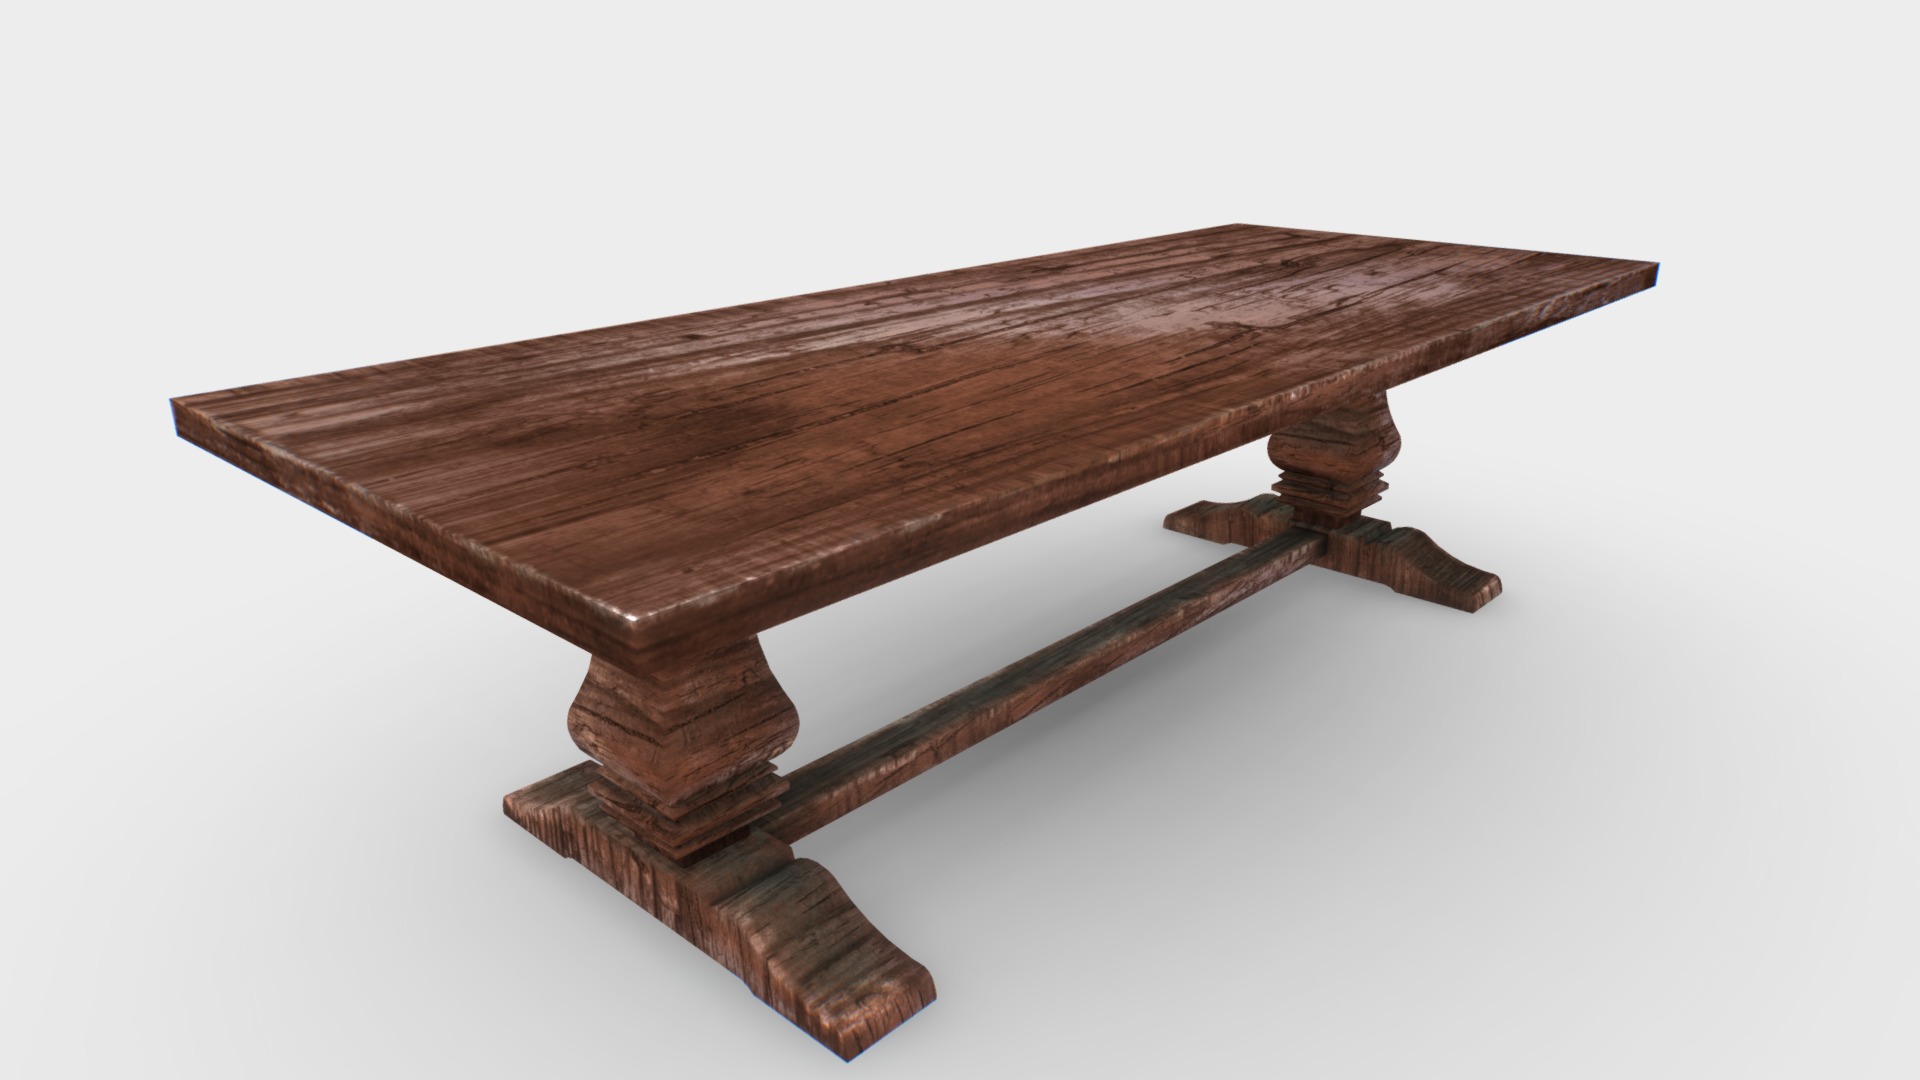 3D model Wooden Table - This is a 3D model of the Wooden Table. The 3D model is about a wooden table with a wooden frame.